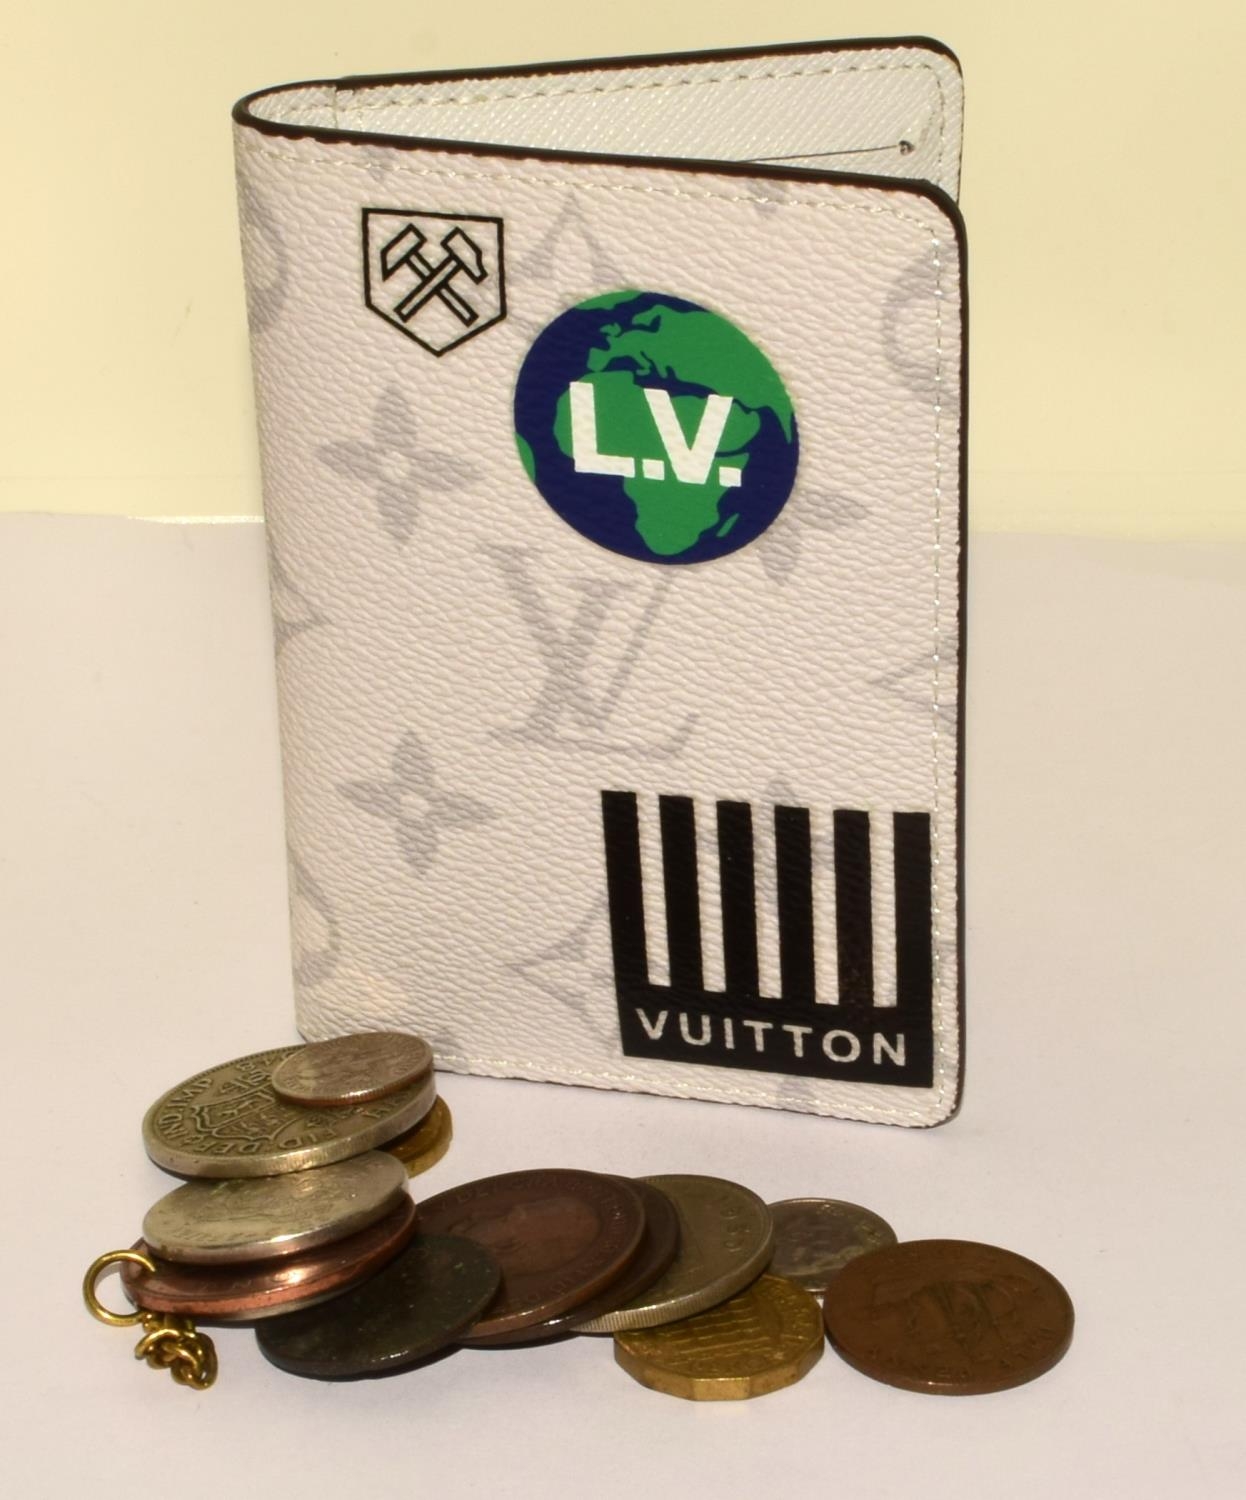 A new unused Wallet marked Vuitton and a quantity of coins ref 22, 23